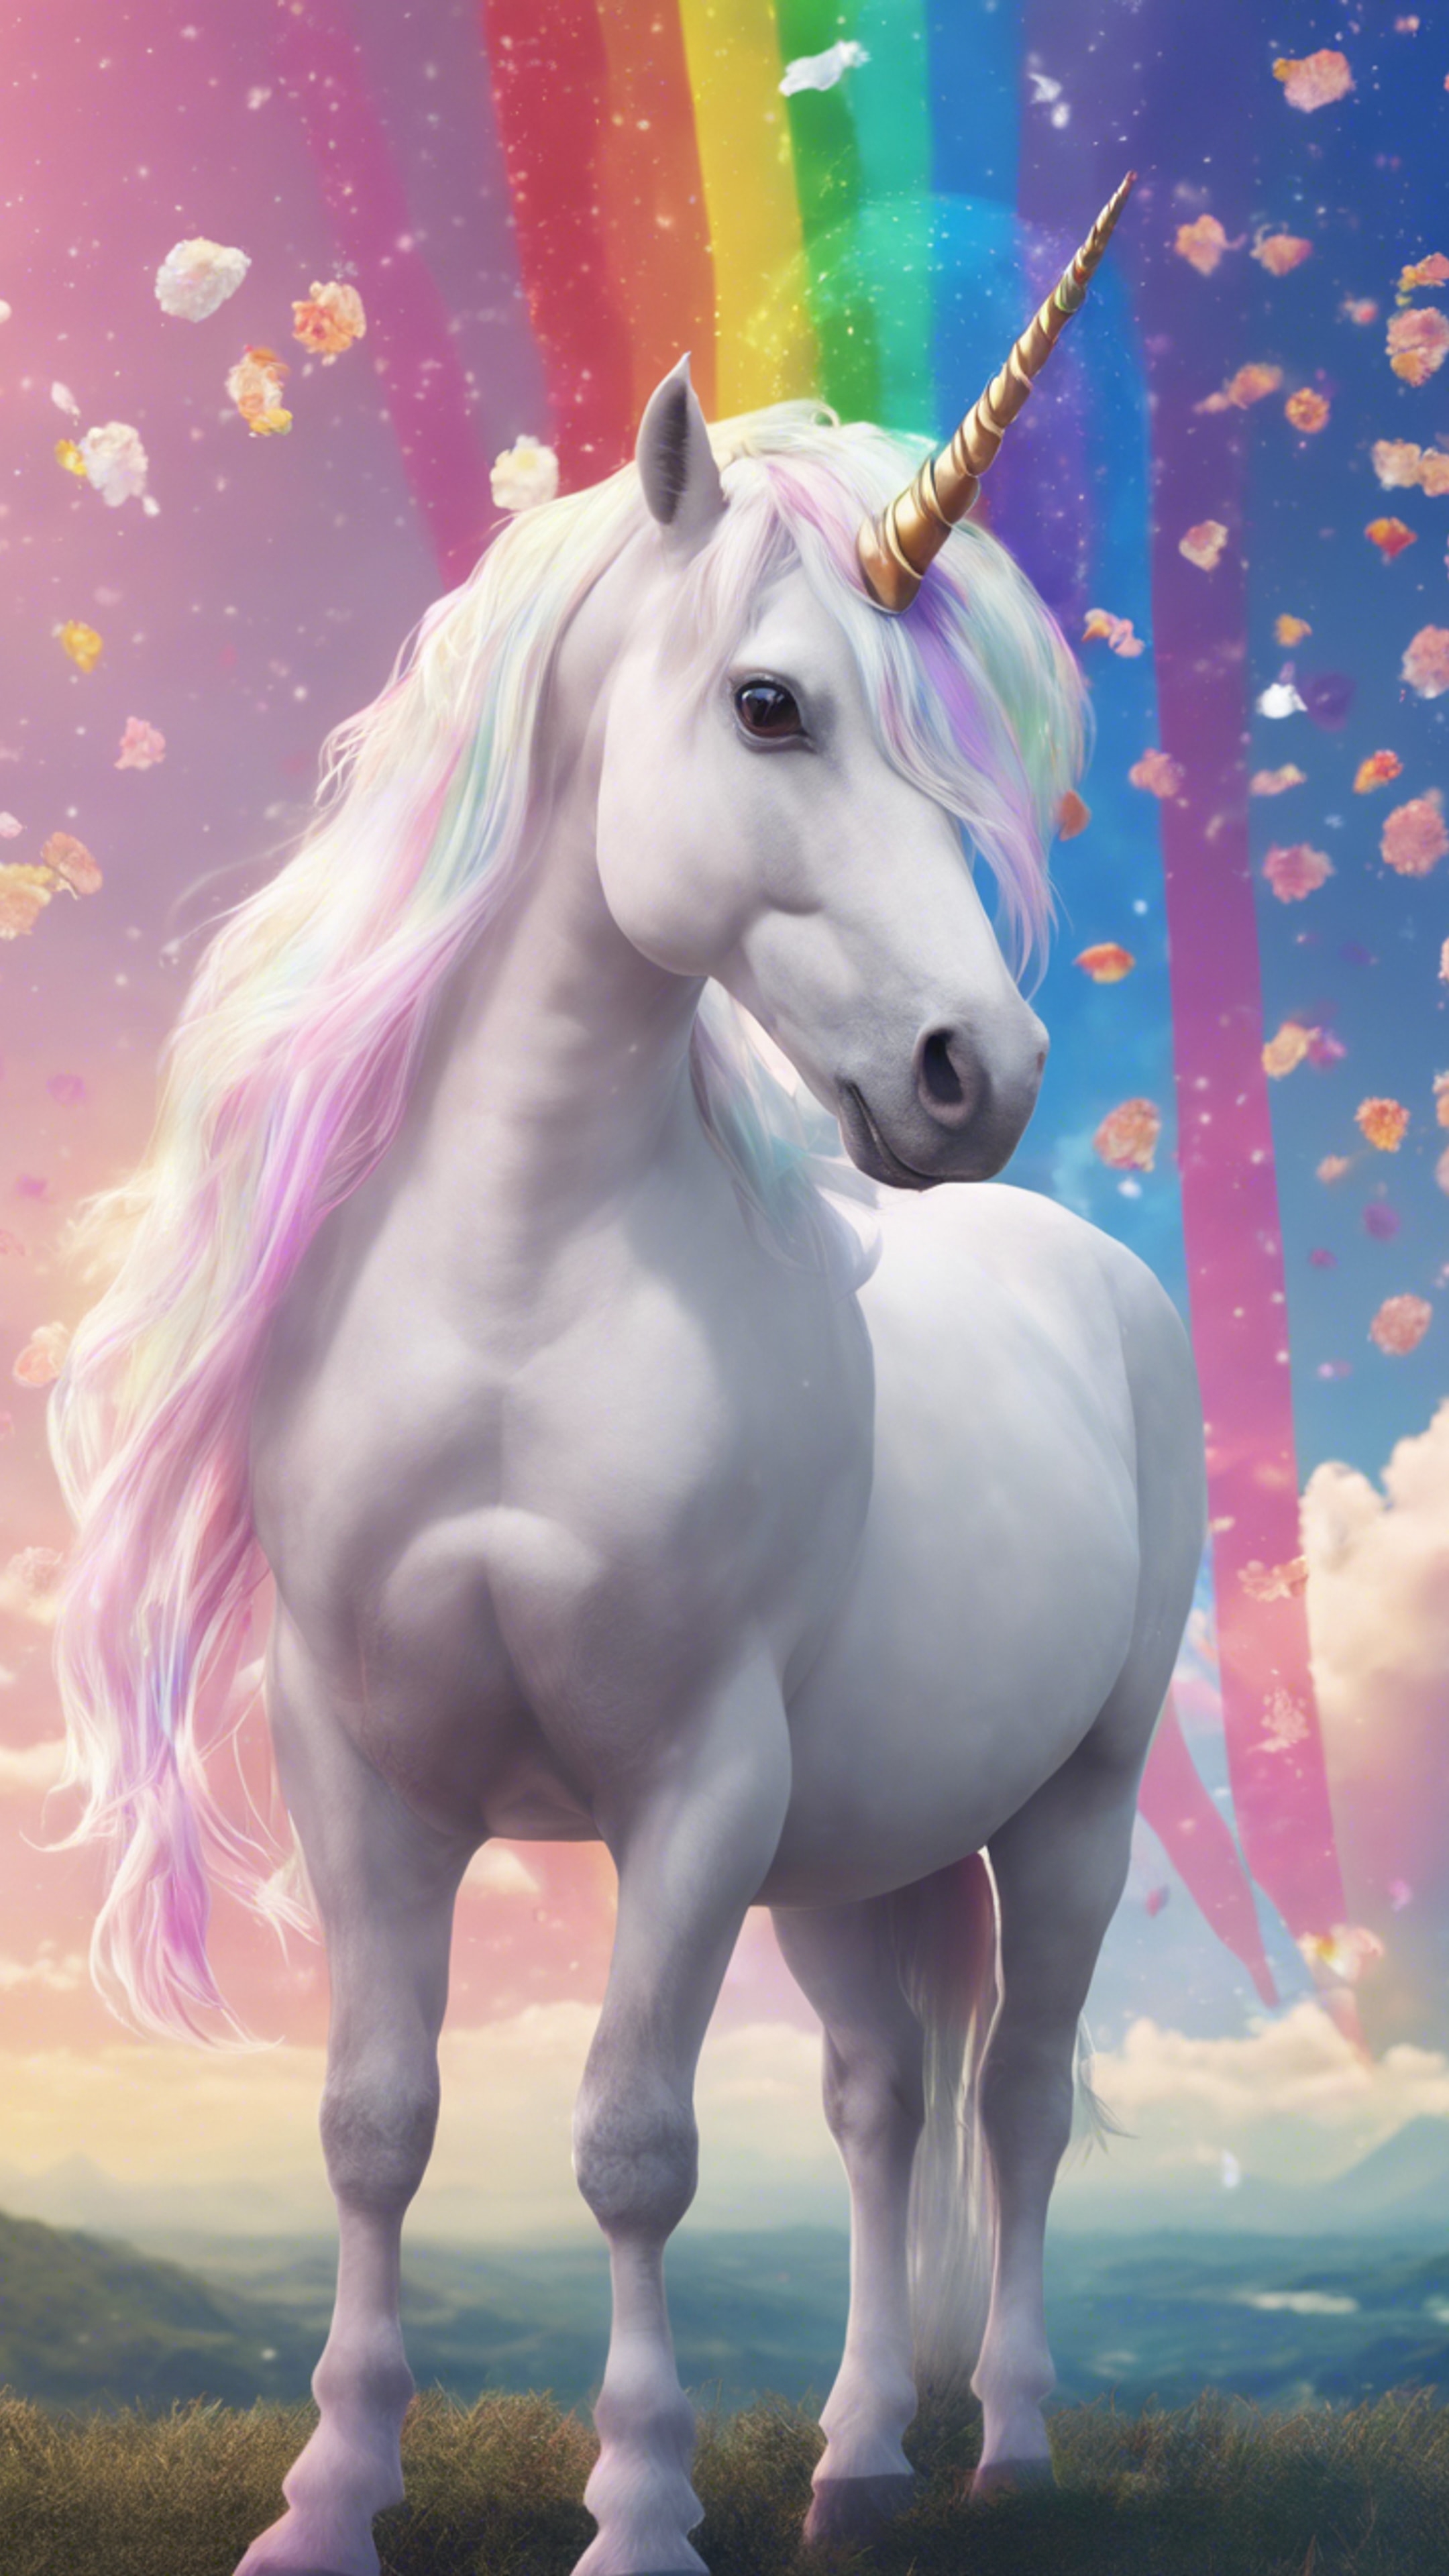 A white unicorn with rainbow-colored mane in a kawaii styled anime background. Ταπετσαρία[3fcd035c52a54abd9a77]